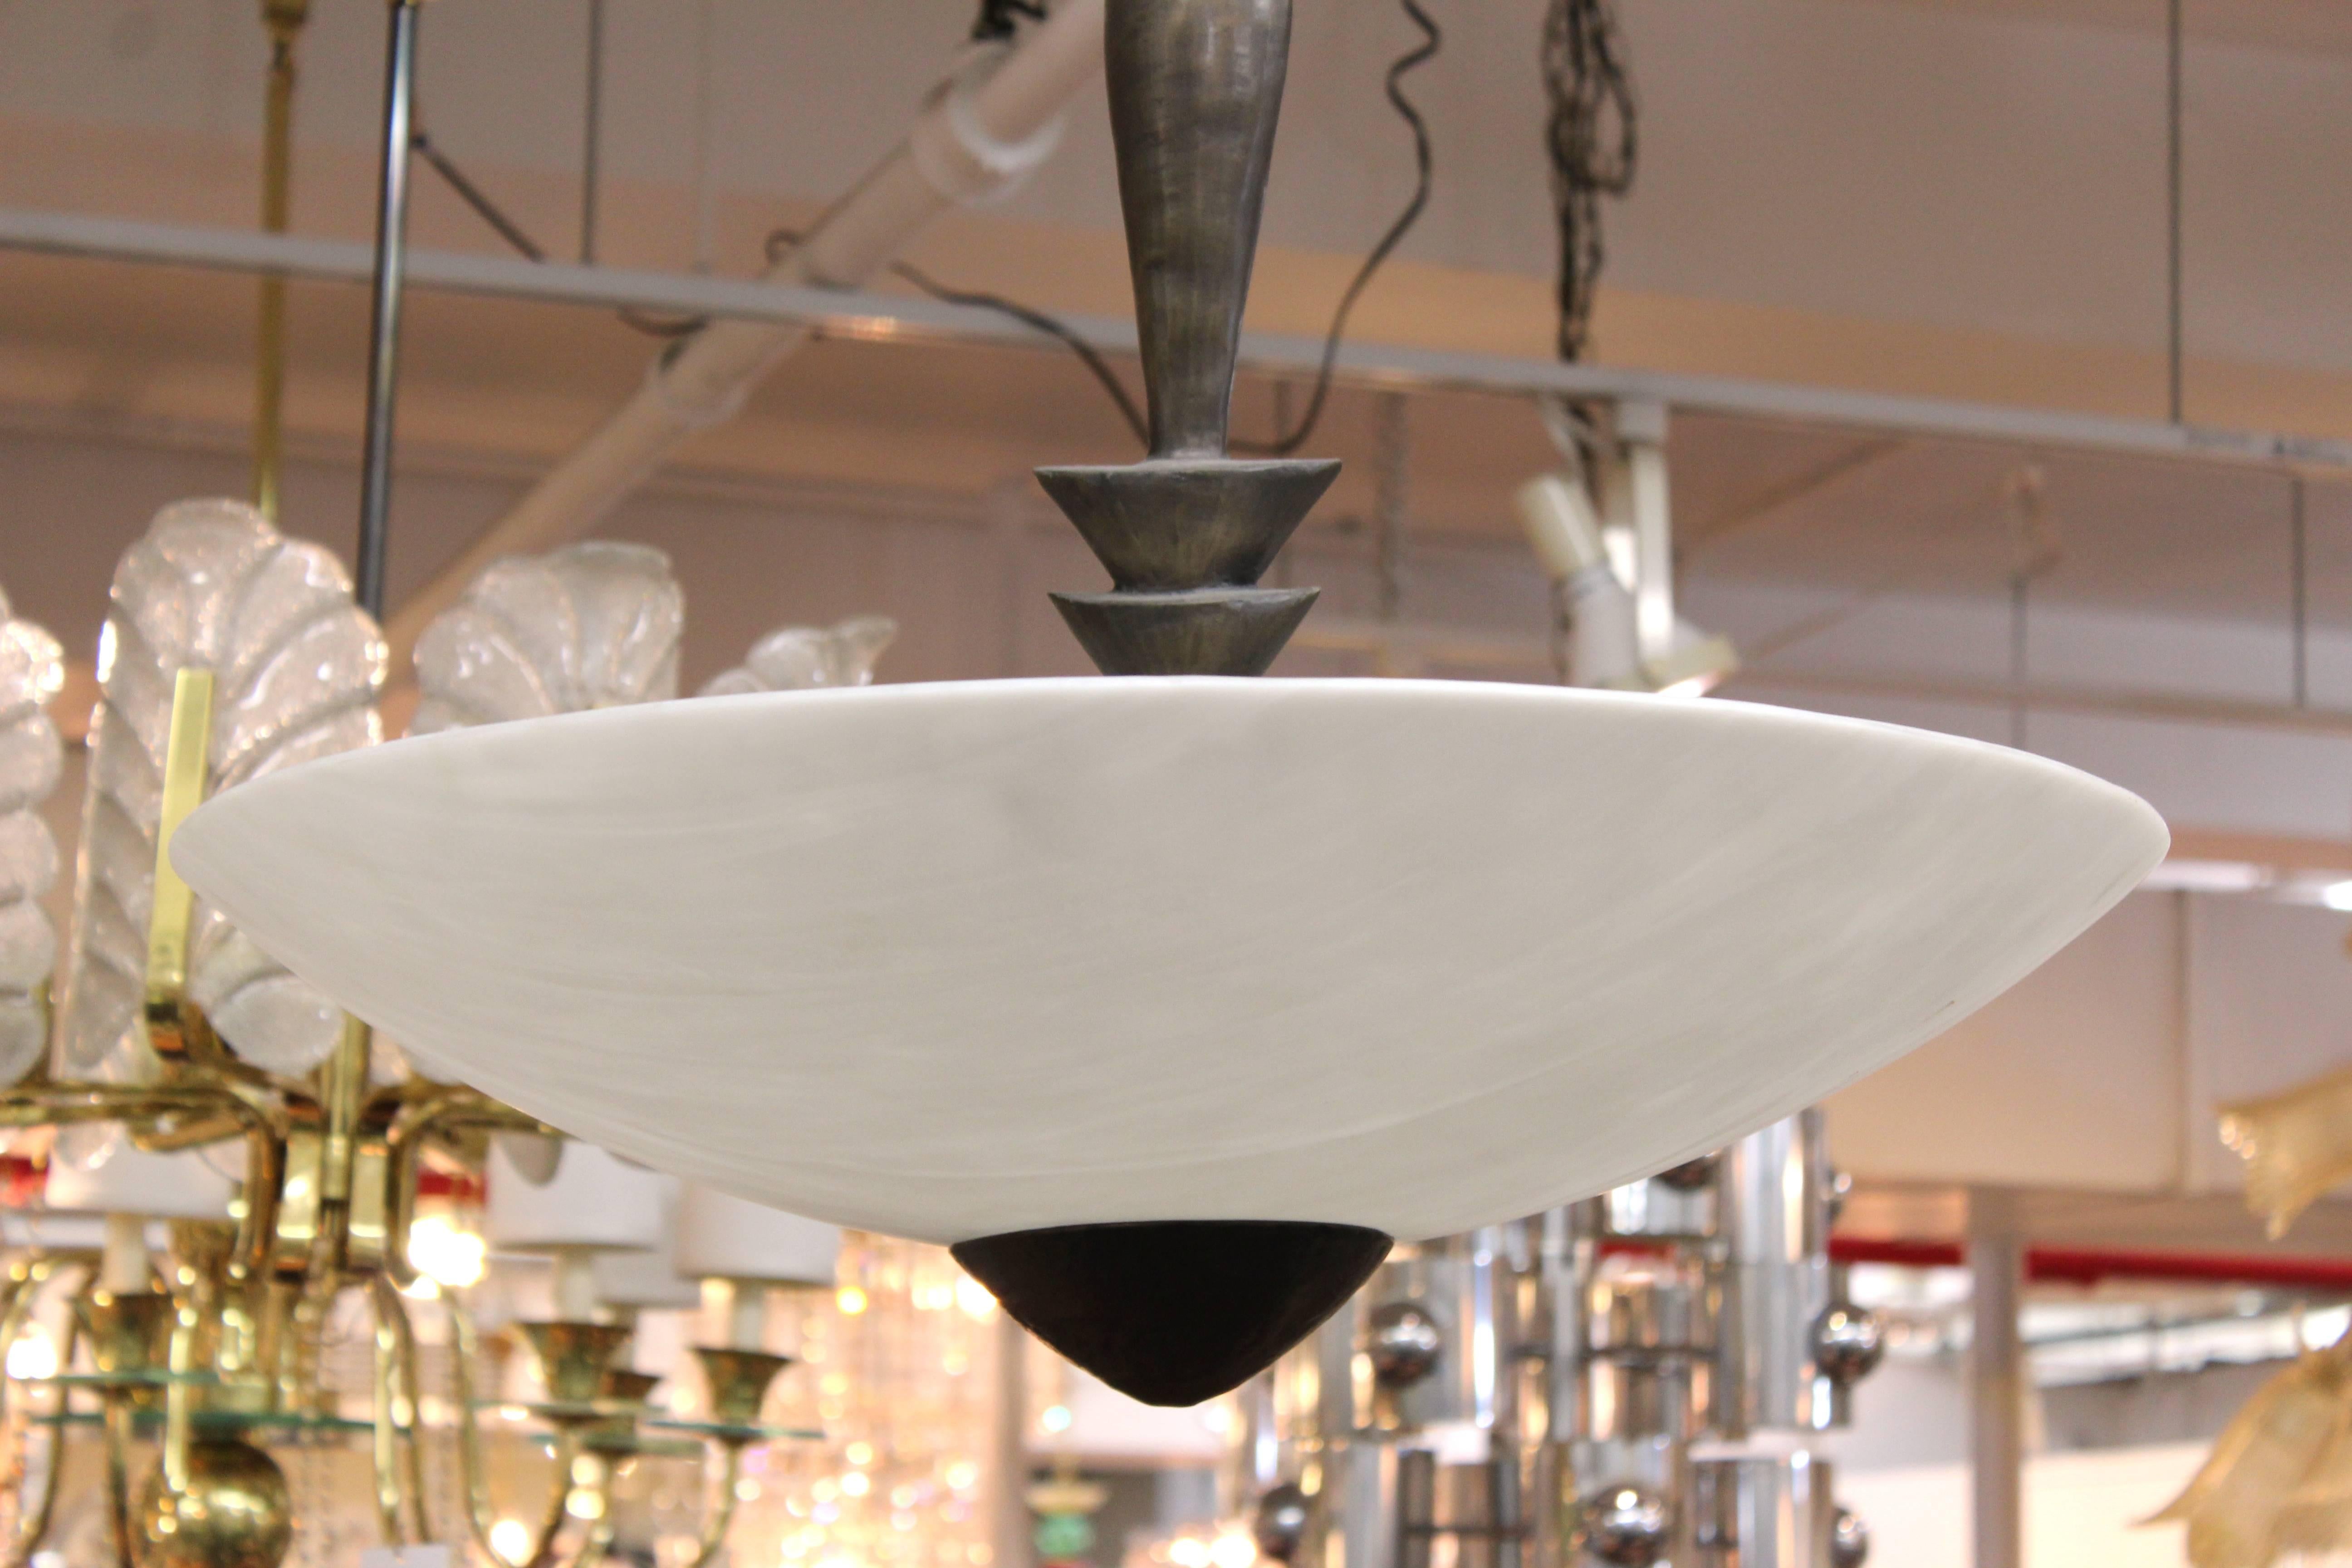 Chandelier in the style of Alberto Giacometti with a large white dome or bowl shade. The lamp comes with an equally substantial matching canopy and has three bulb sockets. This fixture is in good vintage condition and has wear consistent with age